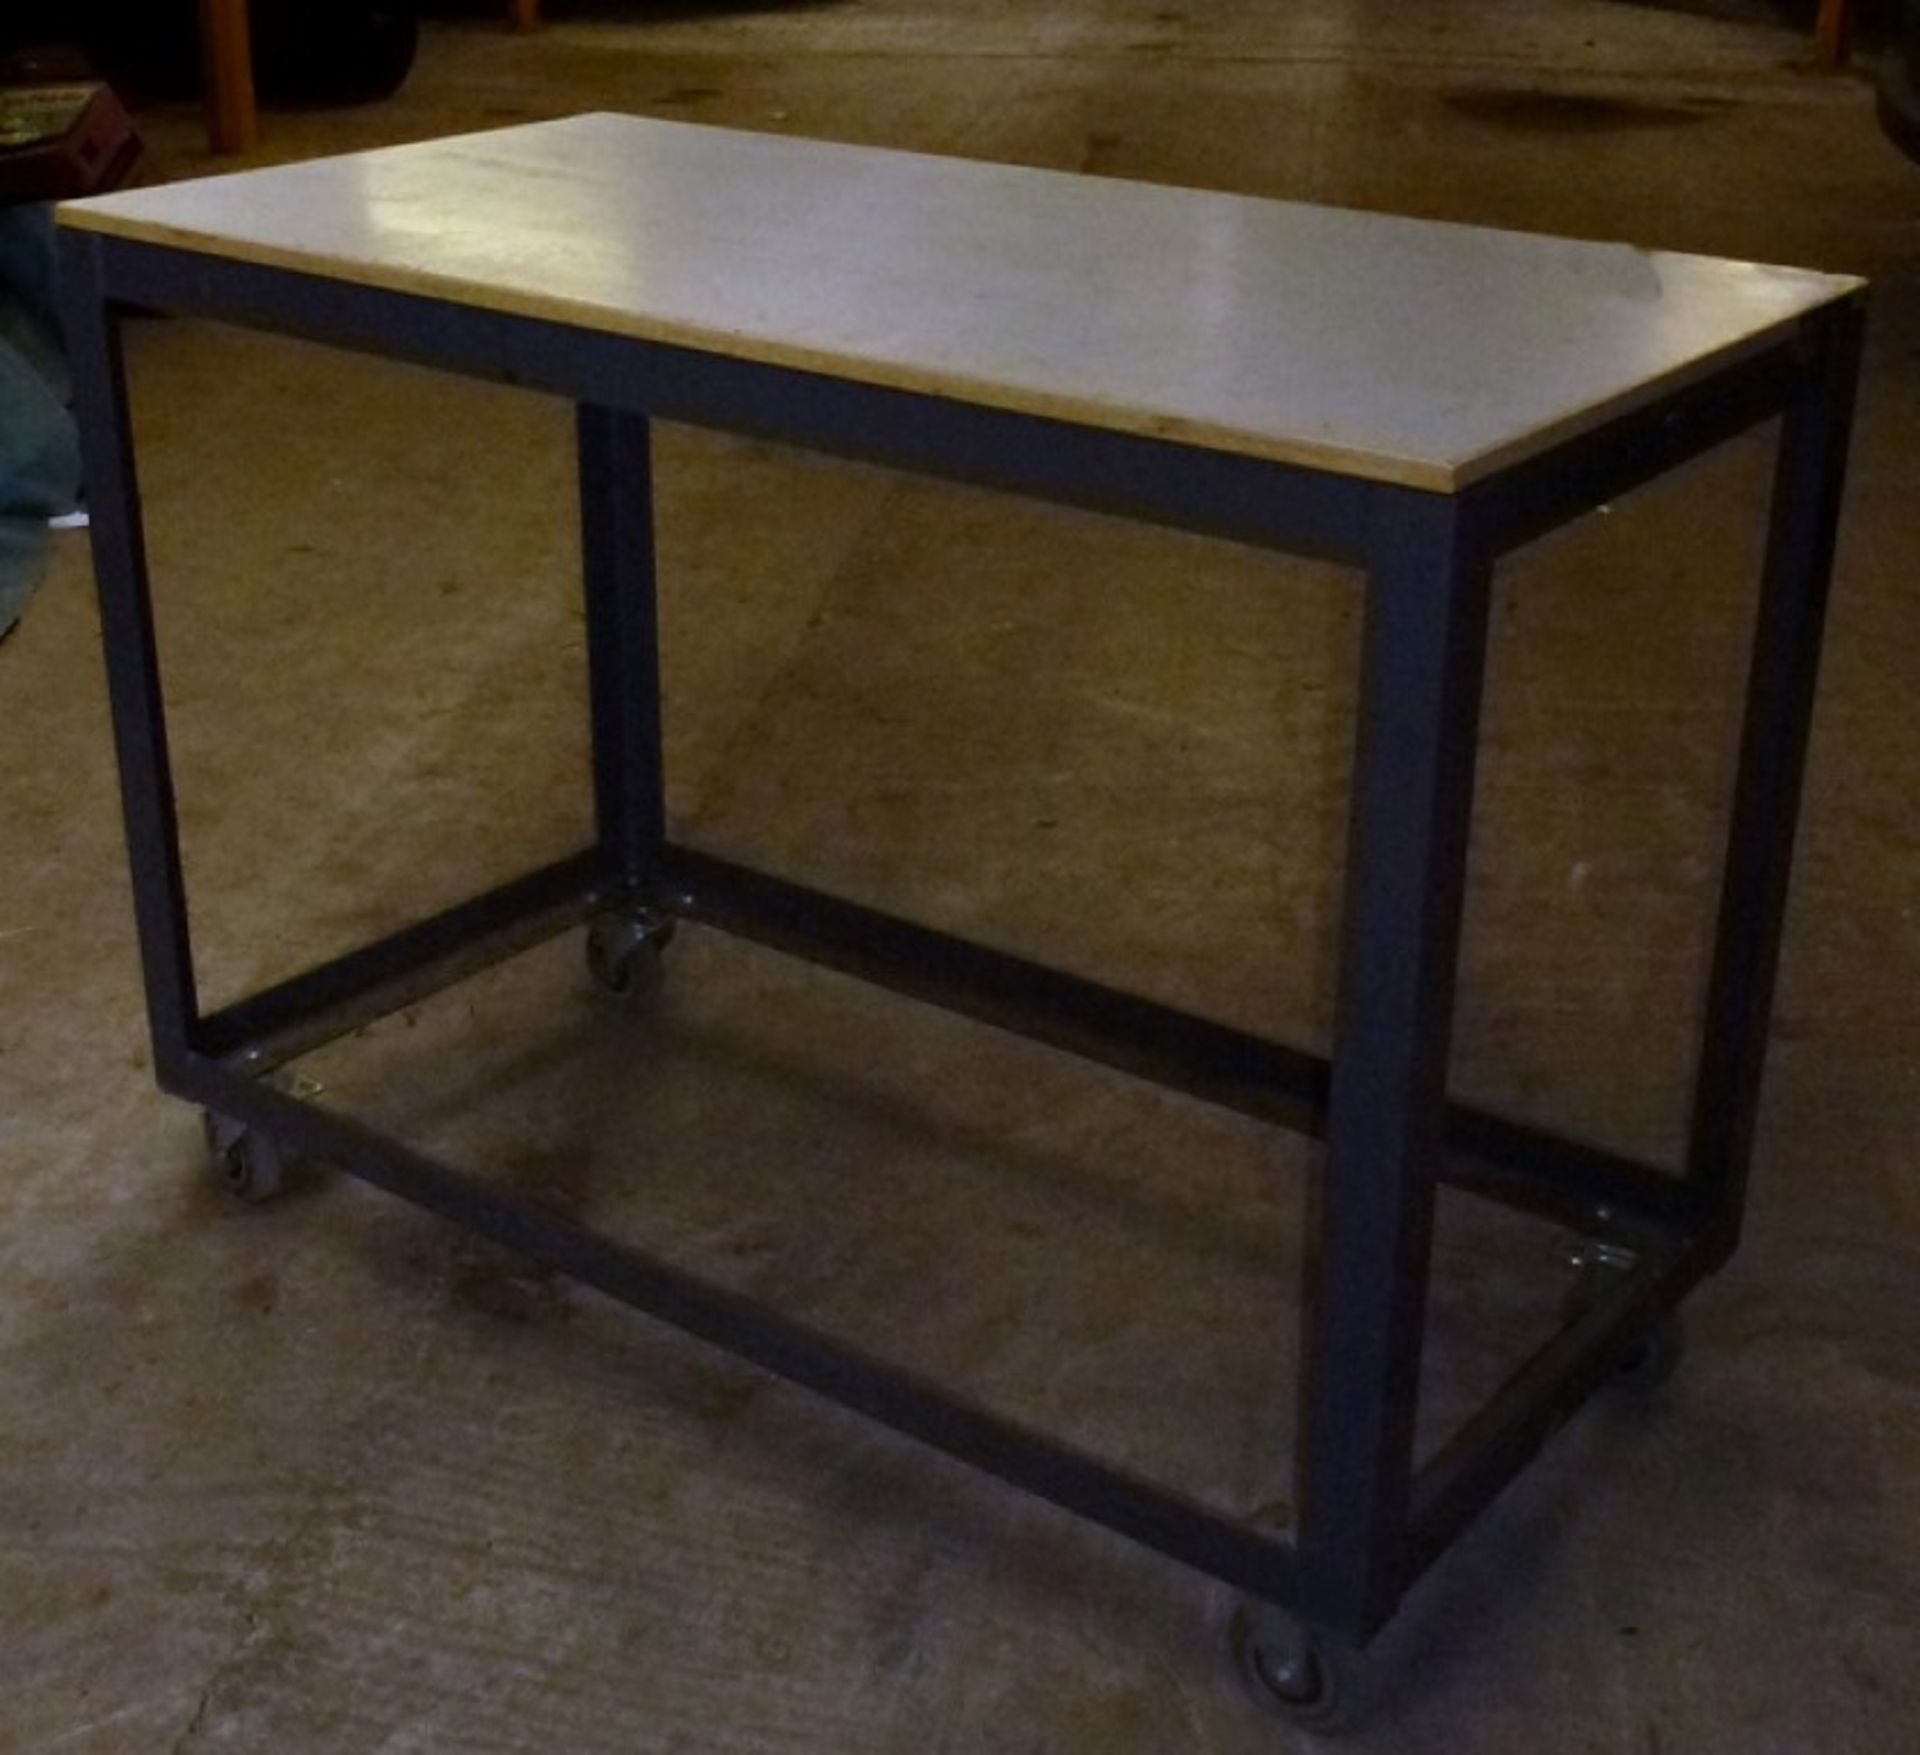 1 x Mobile Work Table - Large Size With Undershelf Bay and Heavy Duty Castor Wheels - Strong Build